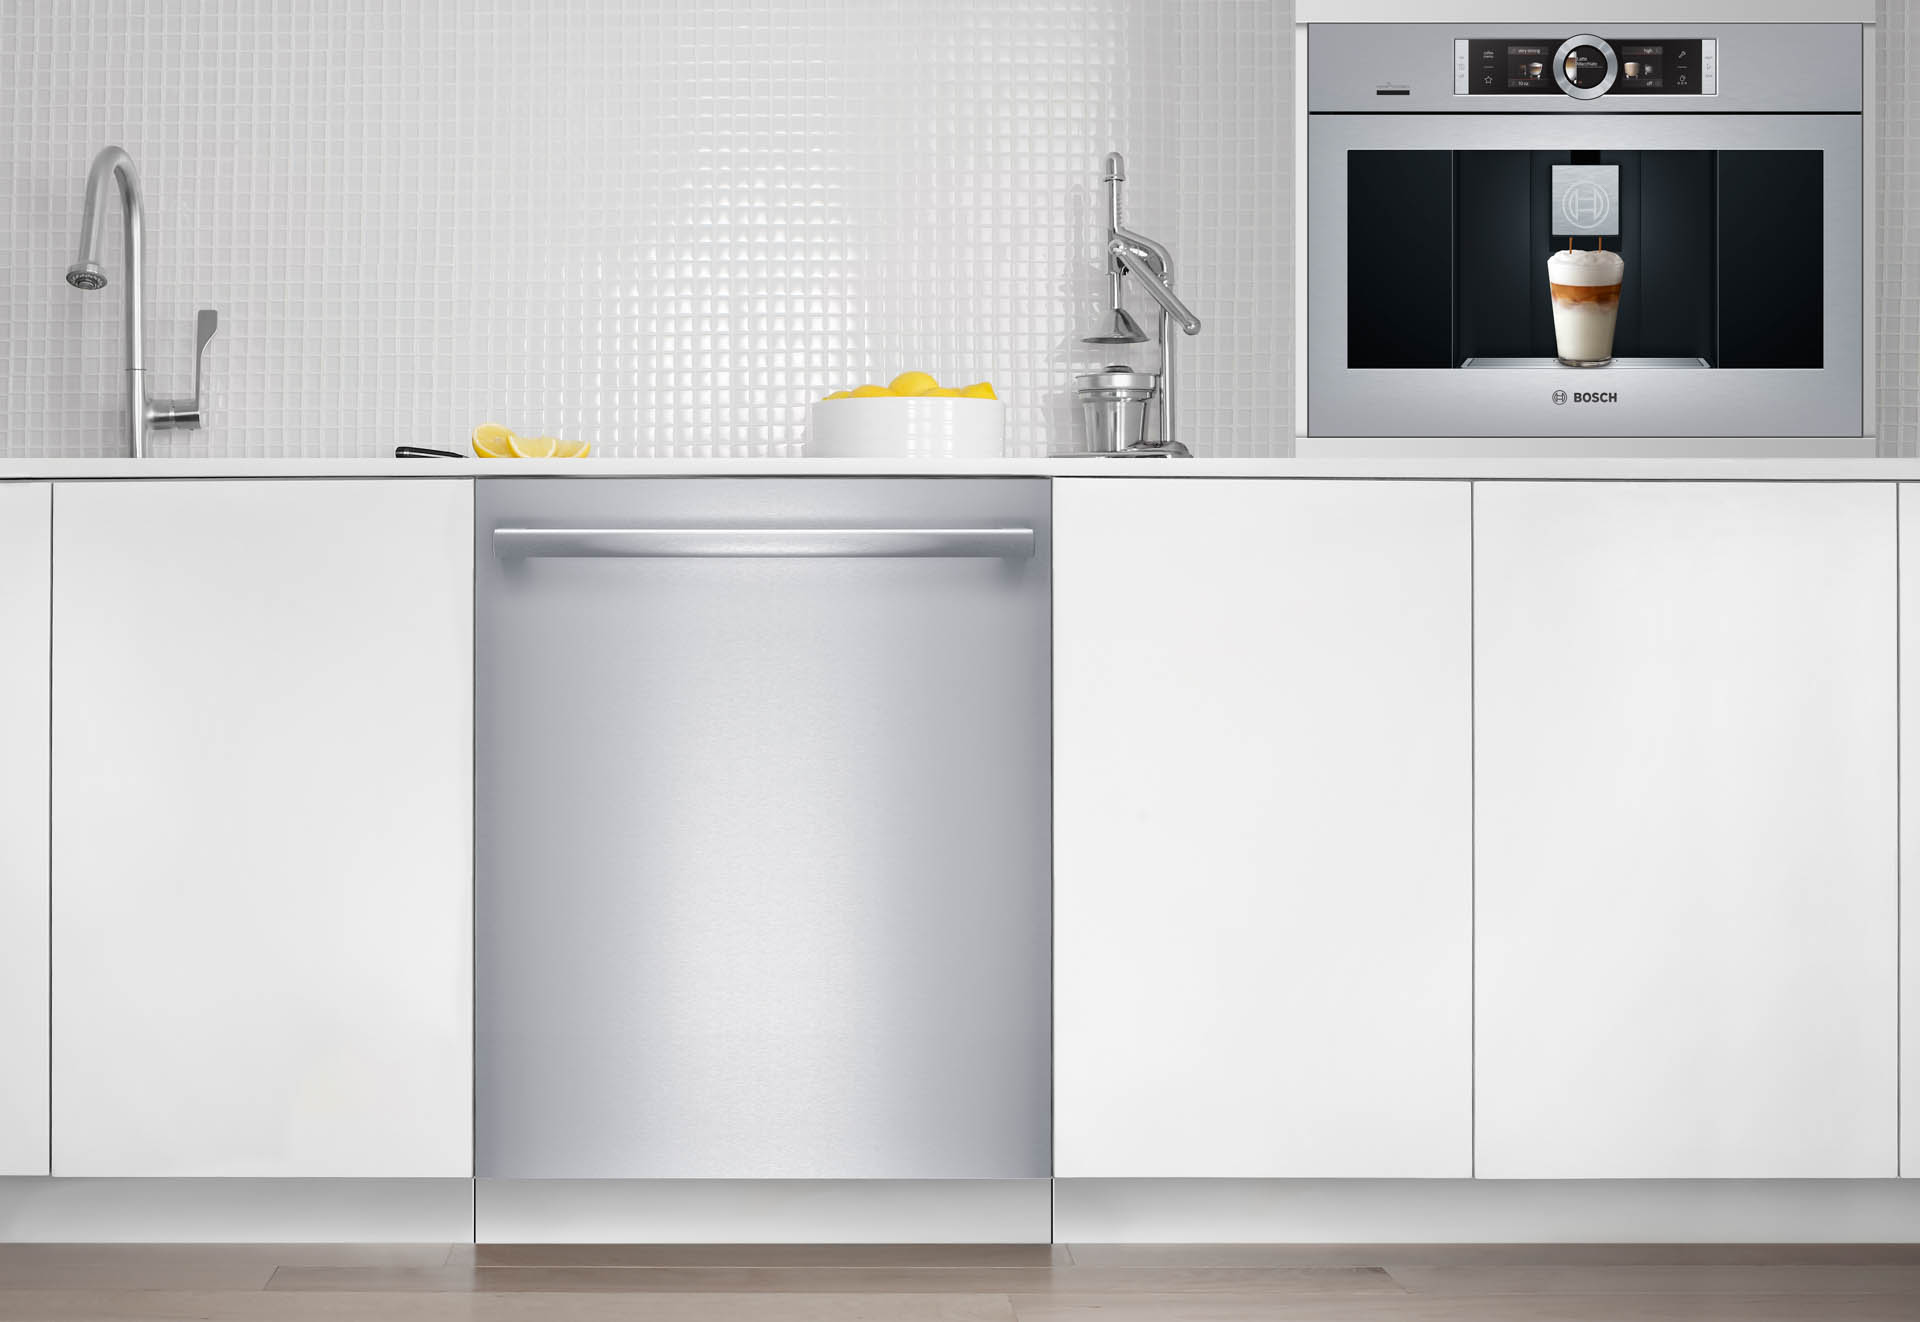 Replacing your dishwasher with a new-generation unit can help conserve resources, and by being smarter about how you get it can save even more. Image: Bosch.